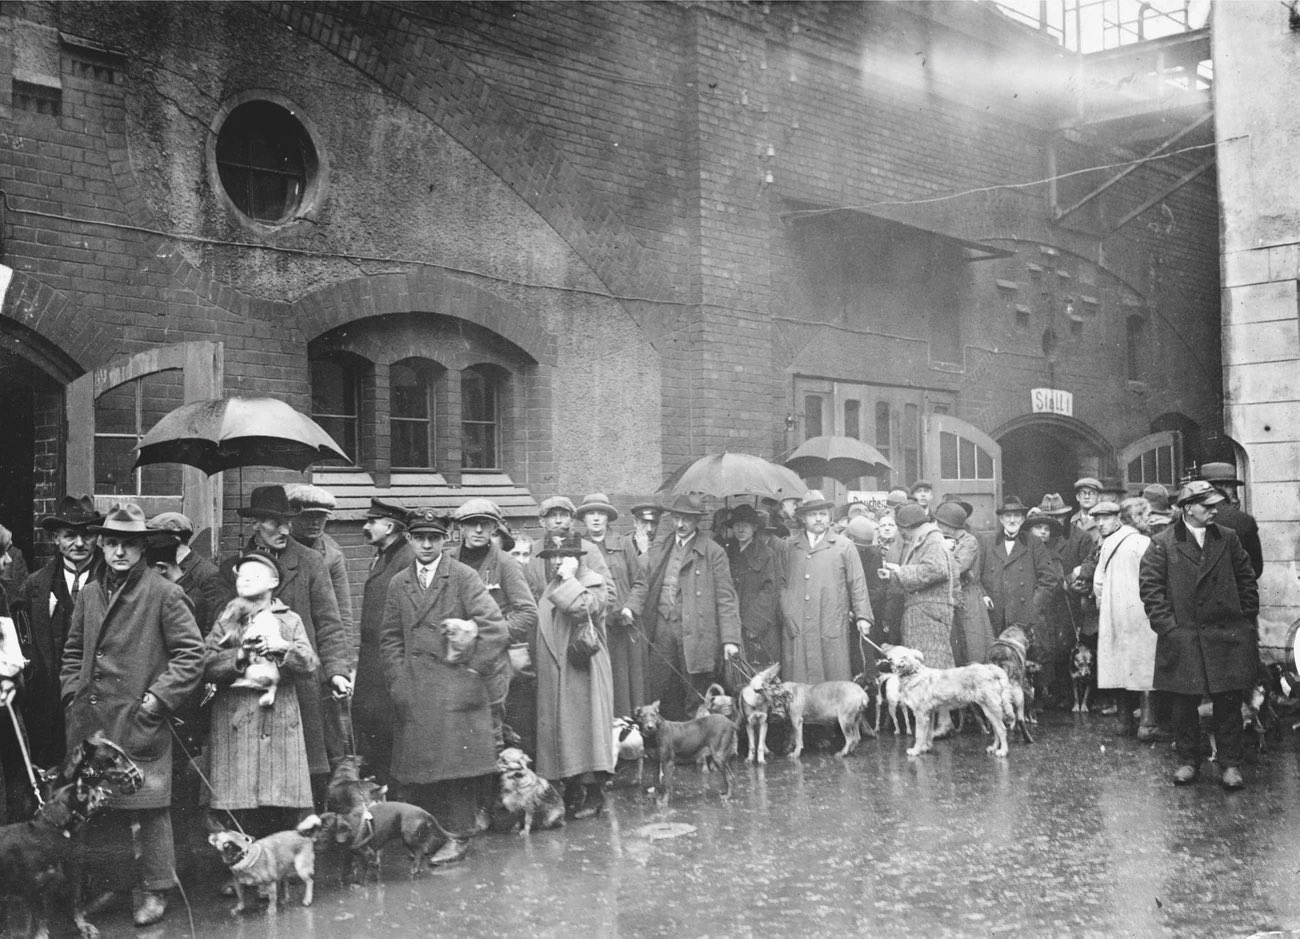 fascinating pics from history - Berlin dog-owners line up to have their pets euthanized due to hyperinflation occurring throughout Weimar Germany. They could not afford to feed their dogs any longer.